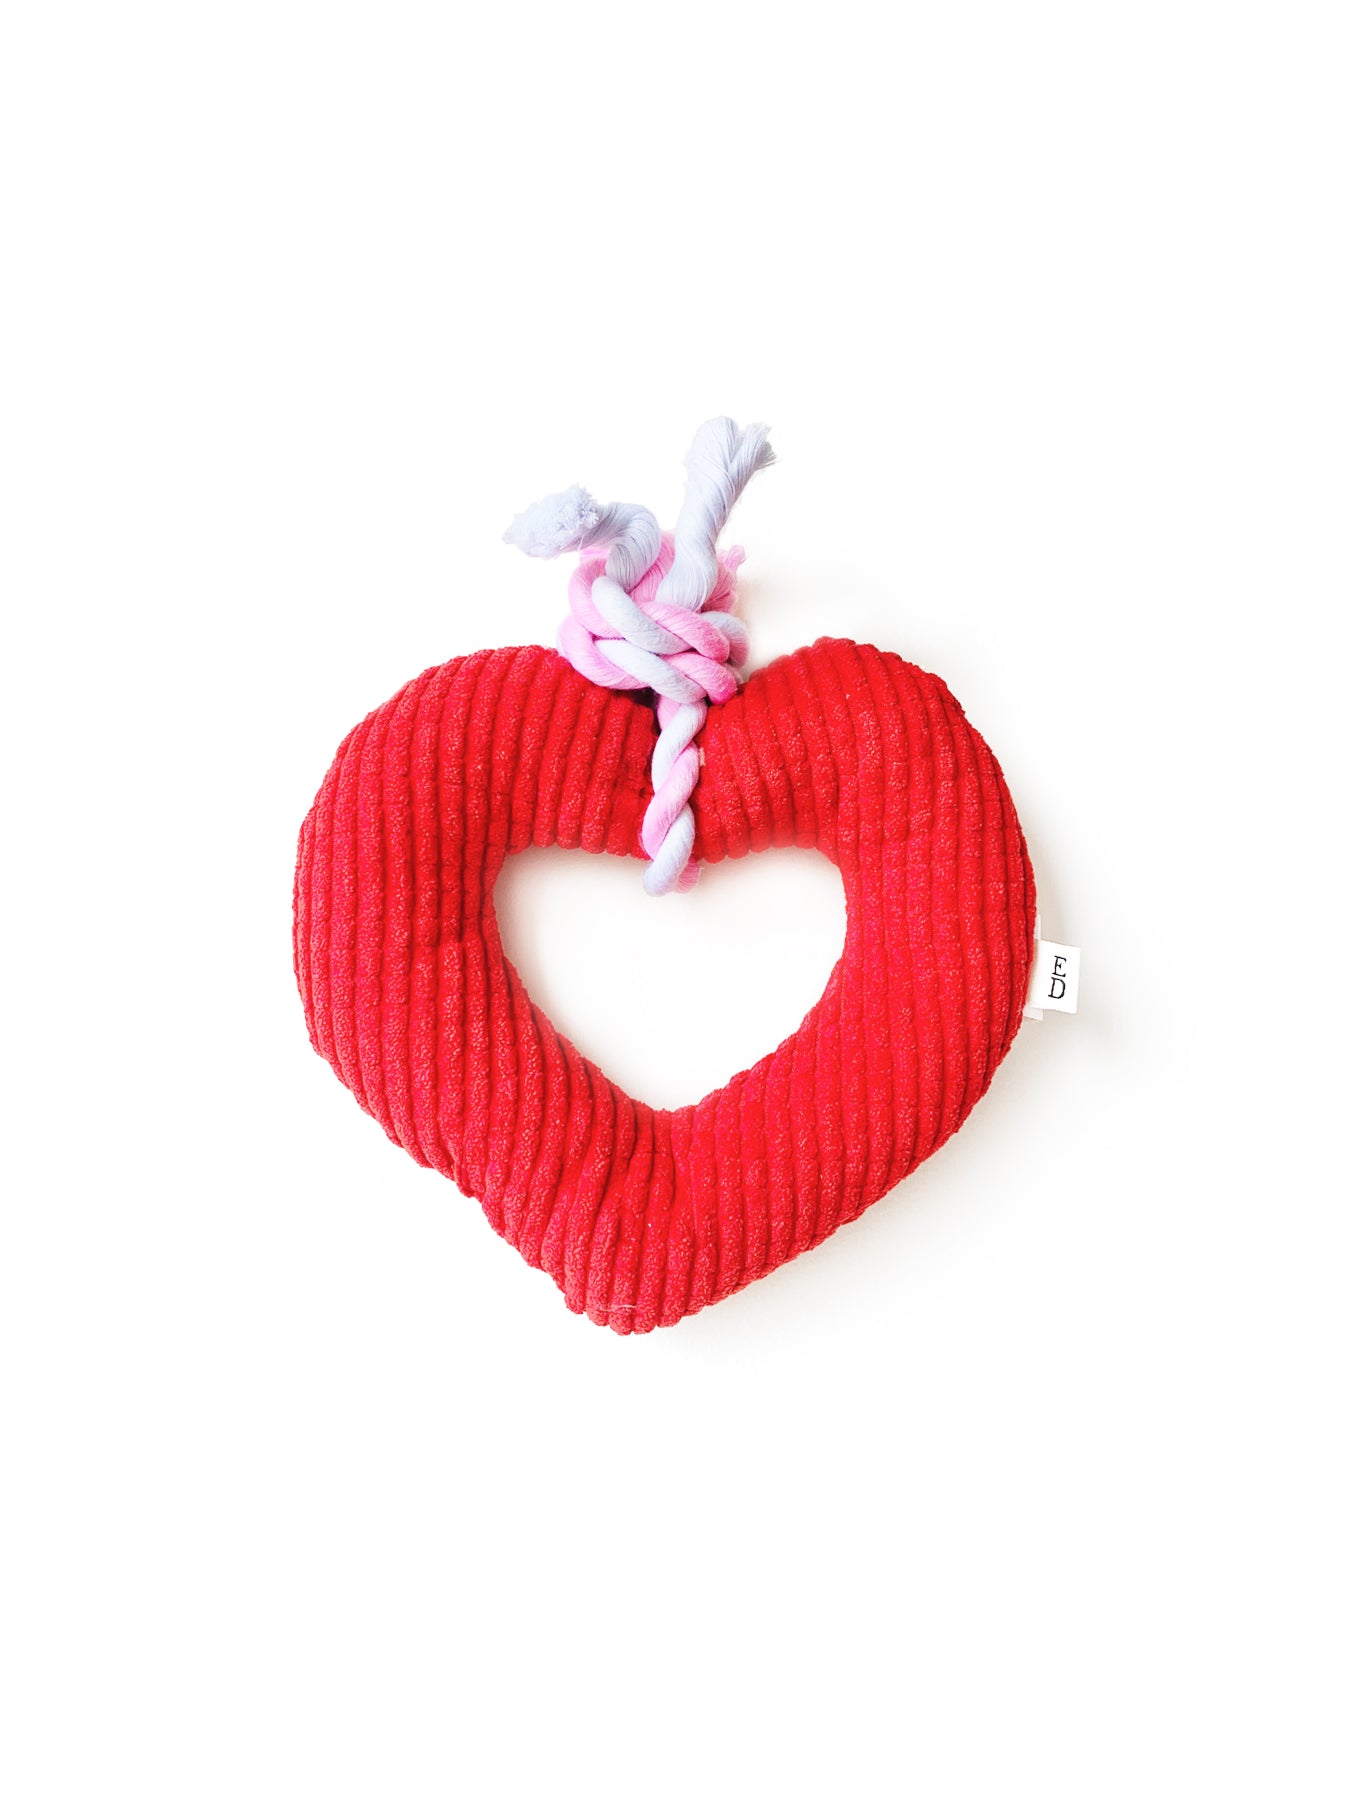 Plush Heart Rope Toy